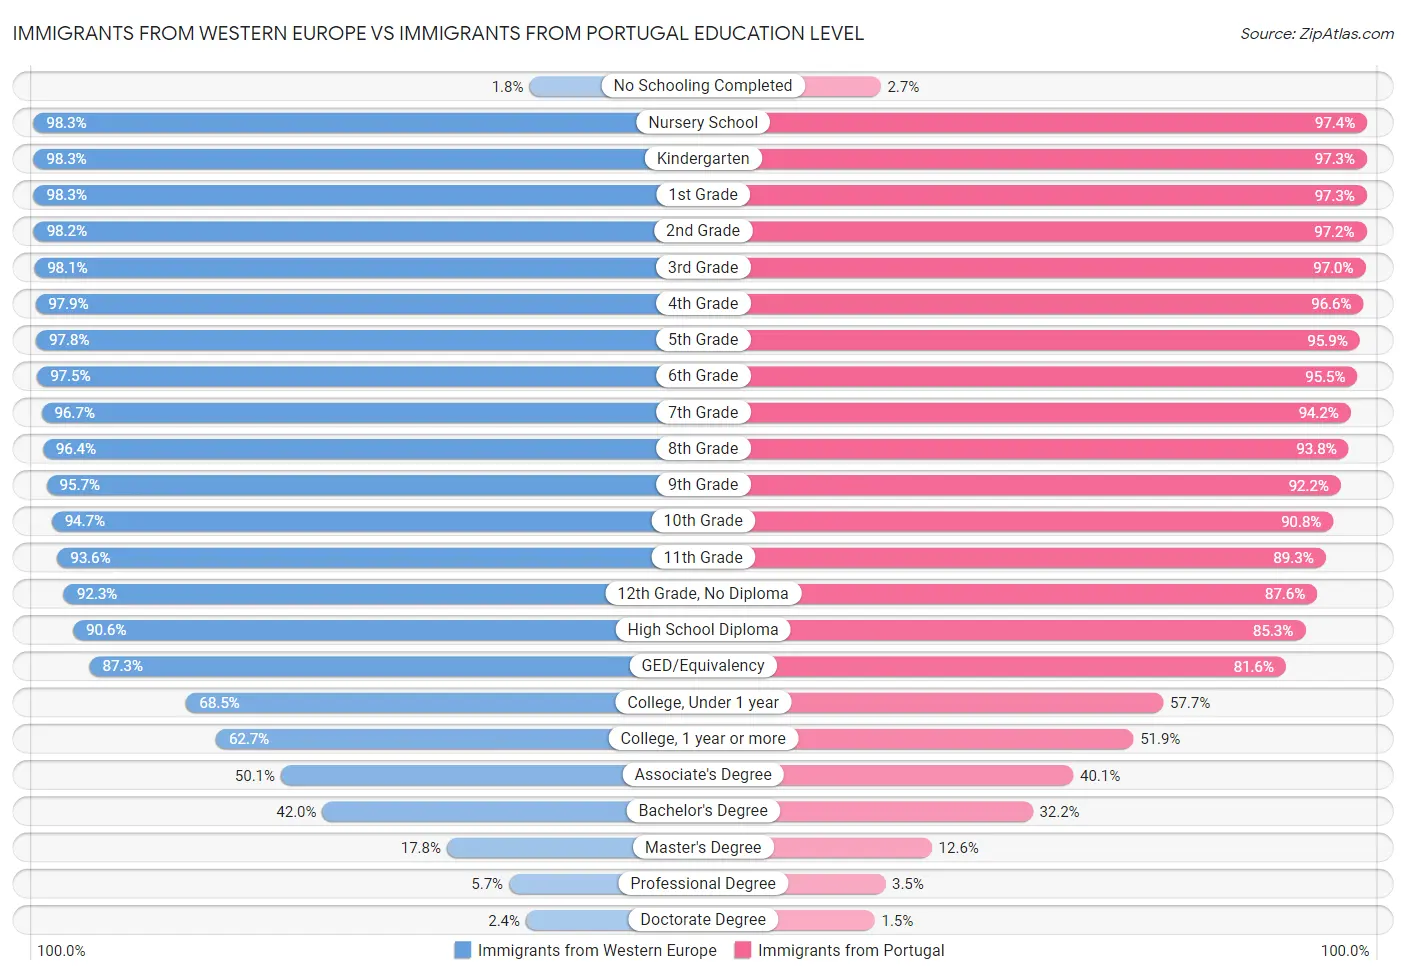 Immigrants from Western Europe vs Immigrants from Portugal Education Level